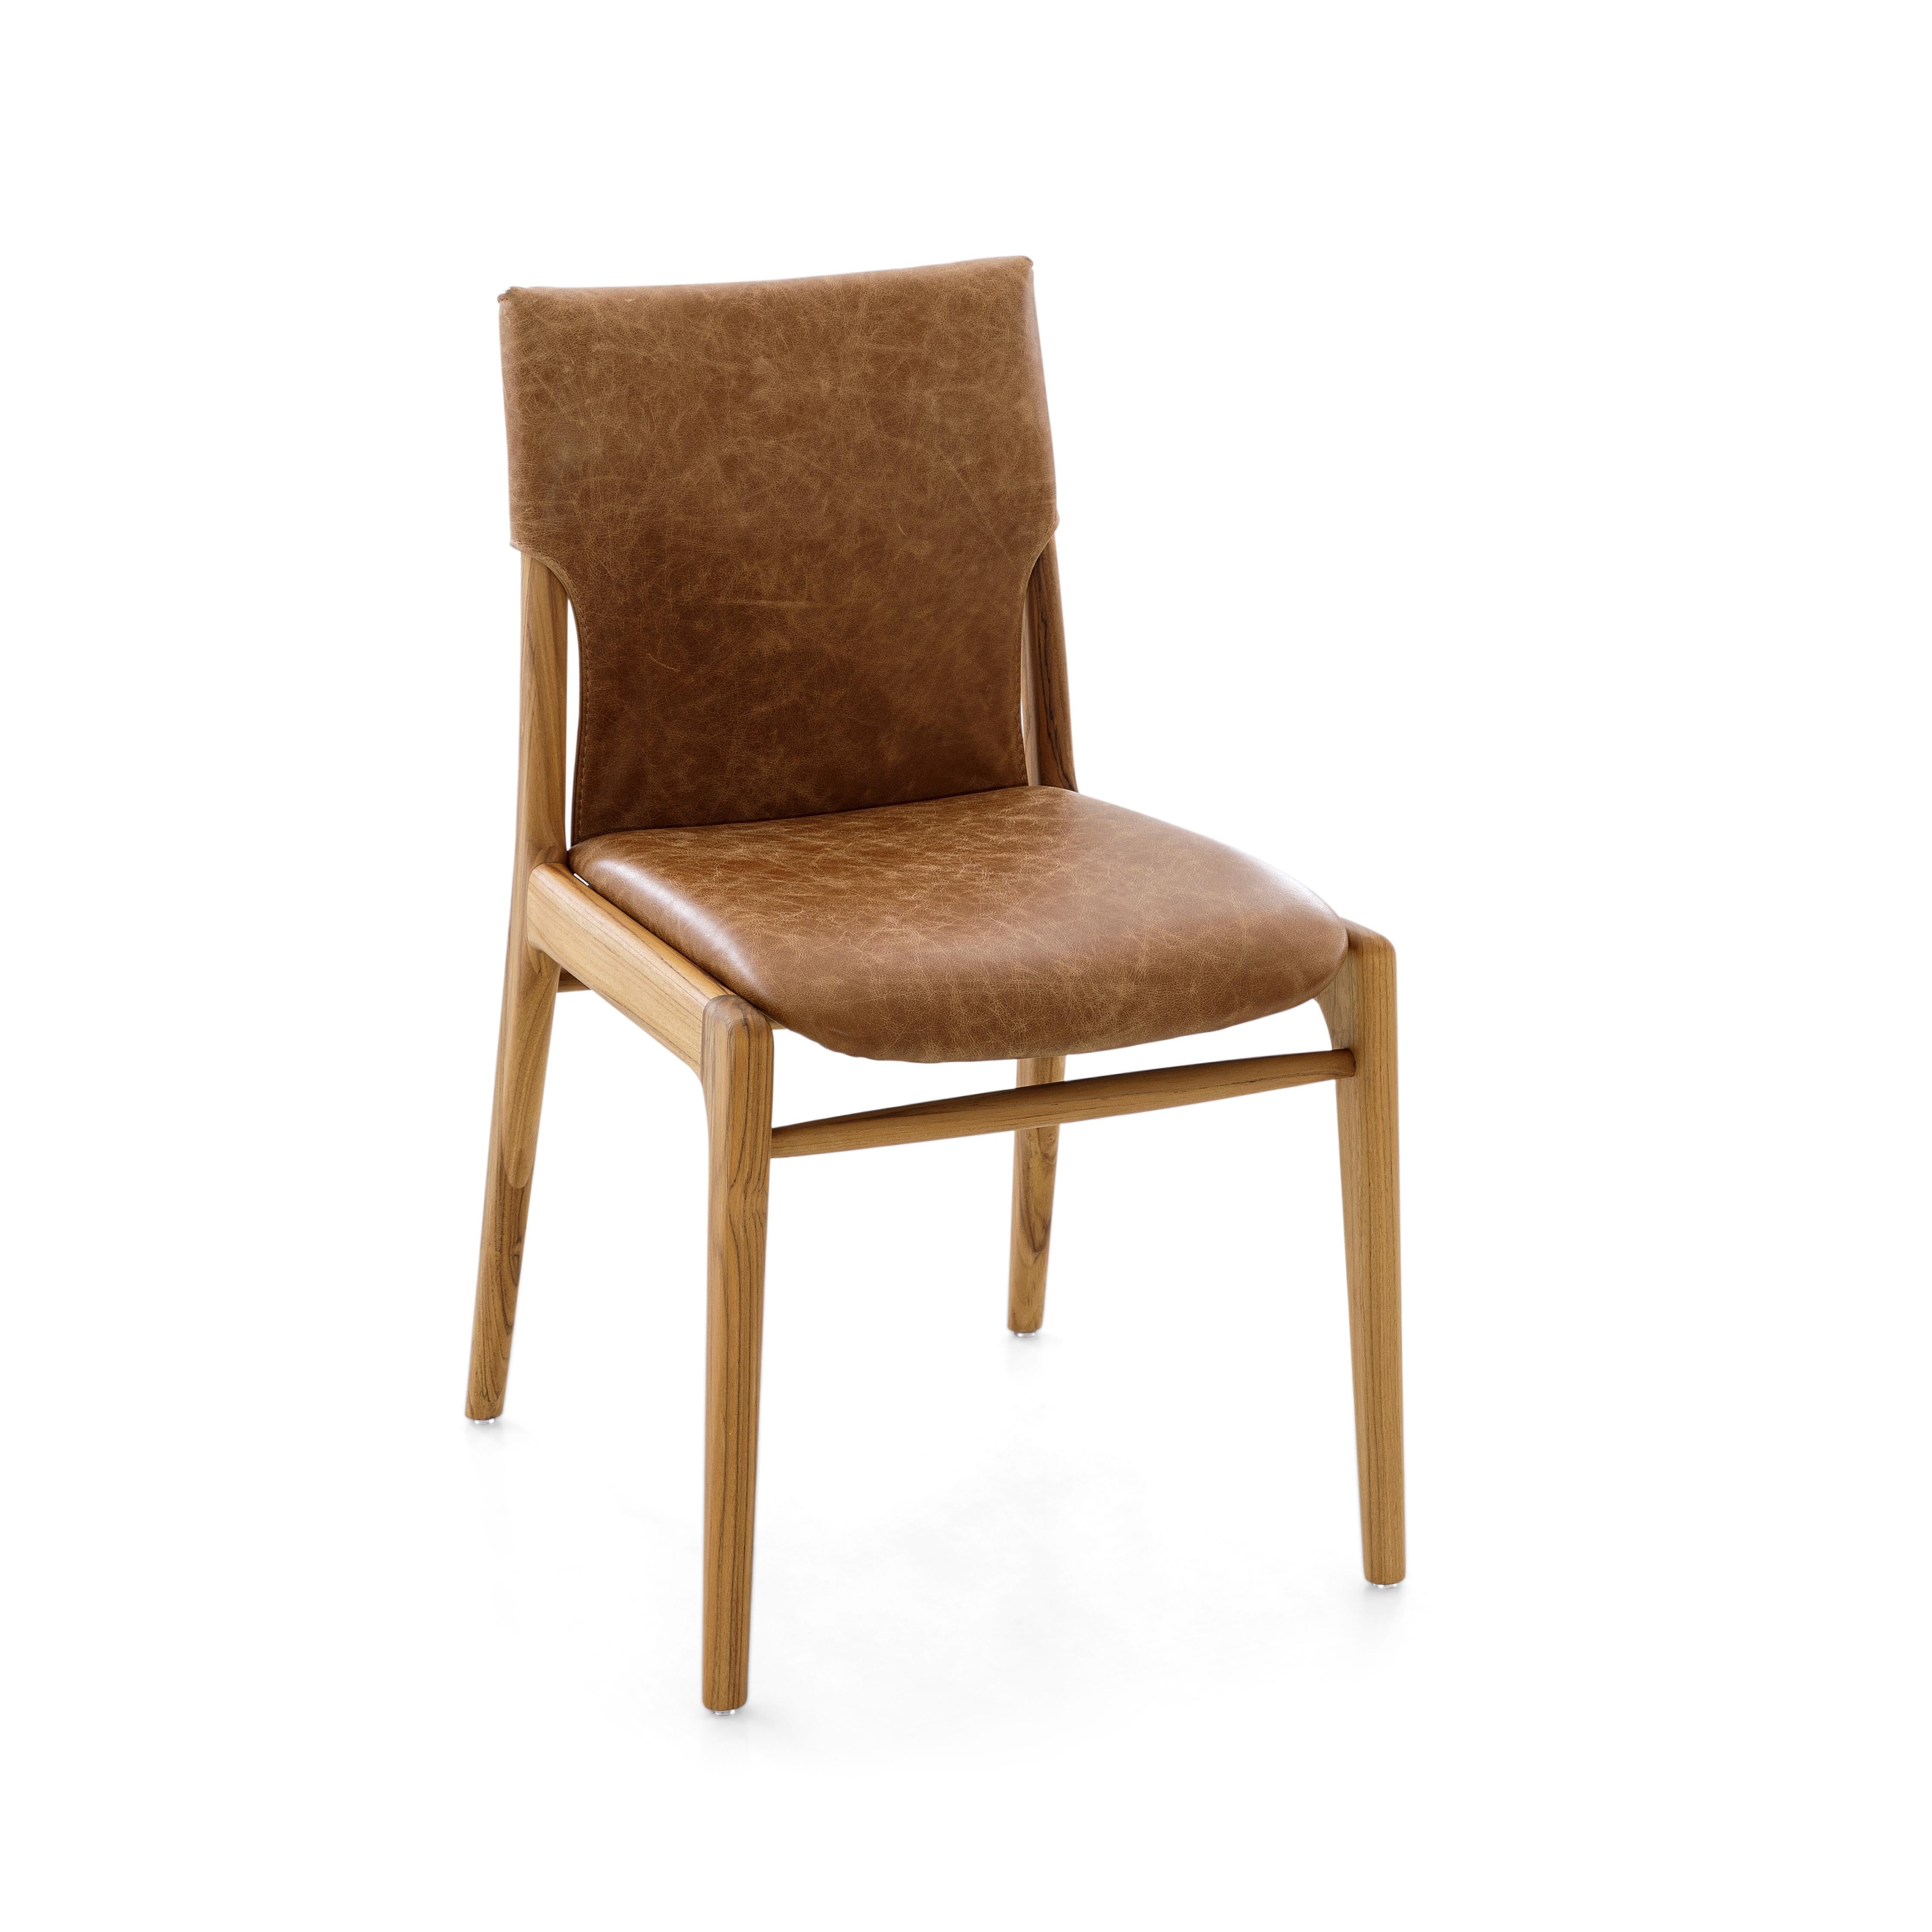 Contemporary Tress Brown Leather Upholstered Dining Chair in Teak Wood Finish, Set of 2 For Sale